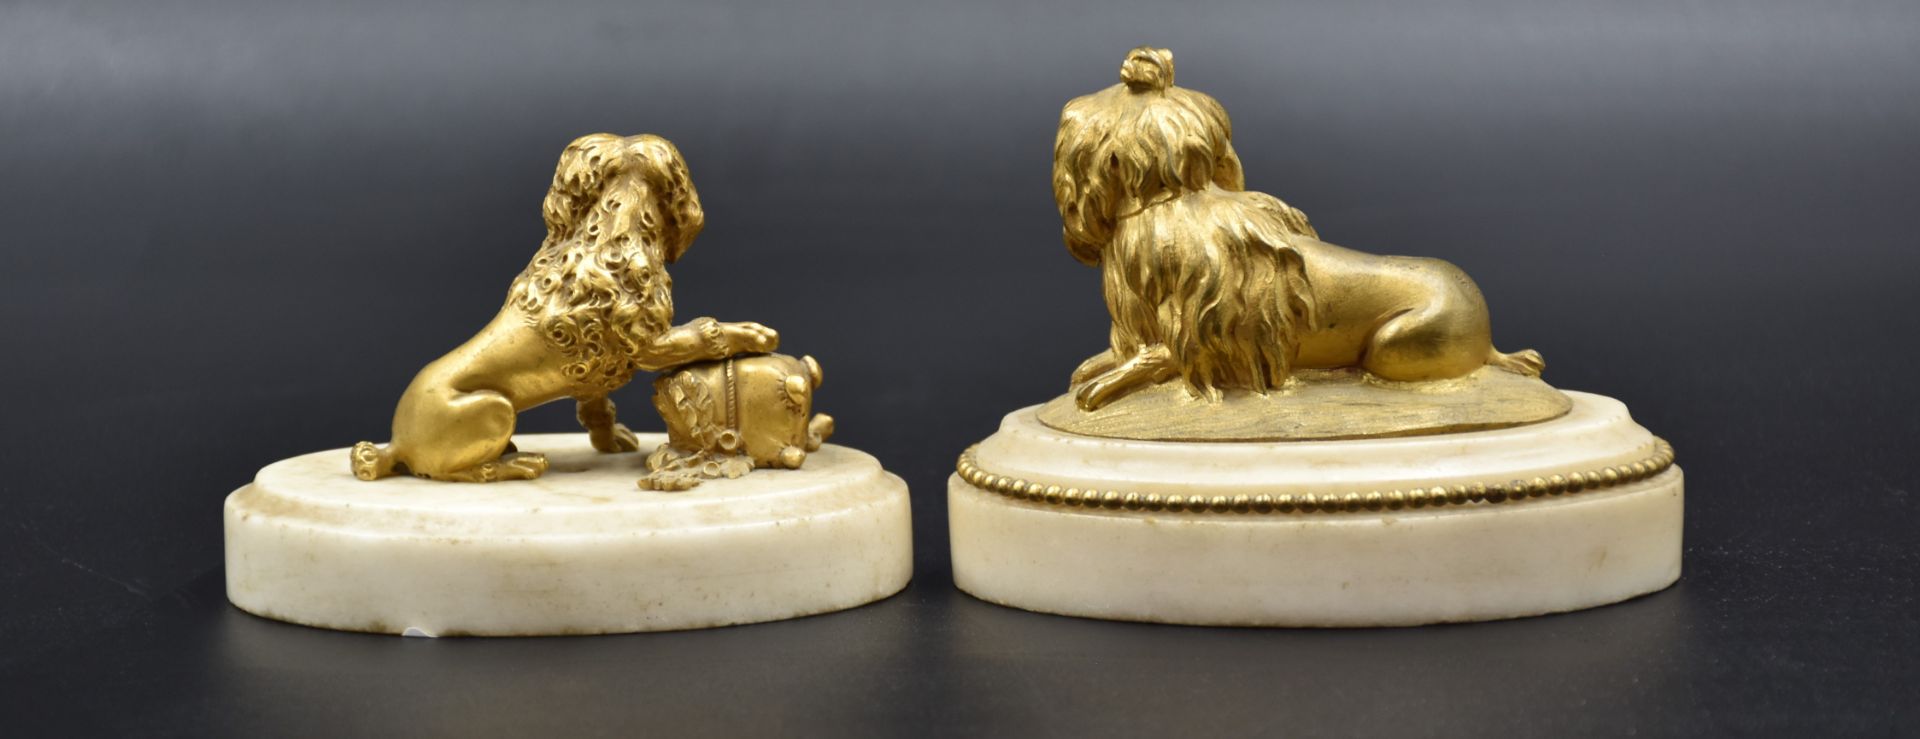 A pair of gilt bronze dogs on white marble bases. Late 18th century. One dog to be reattached. Total - Image 2 of 4